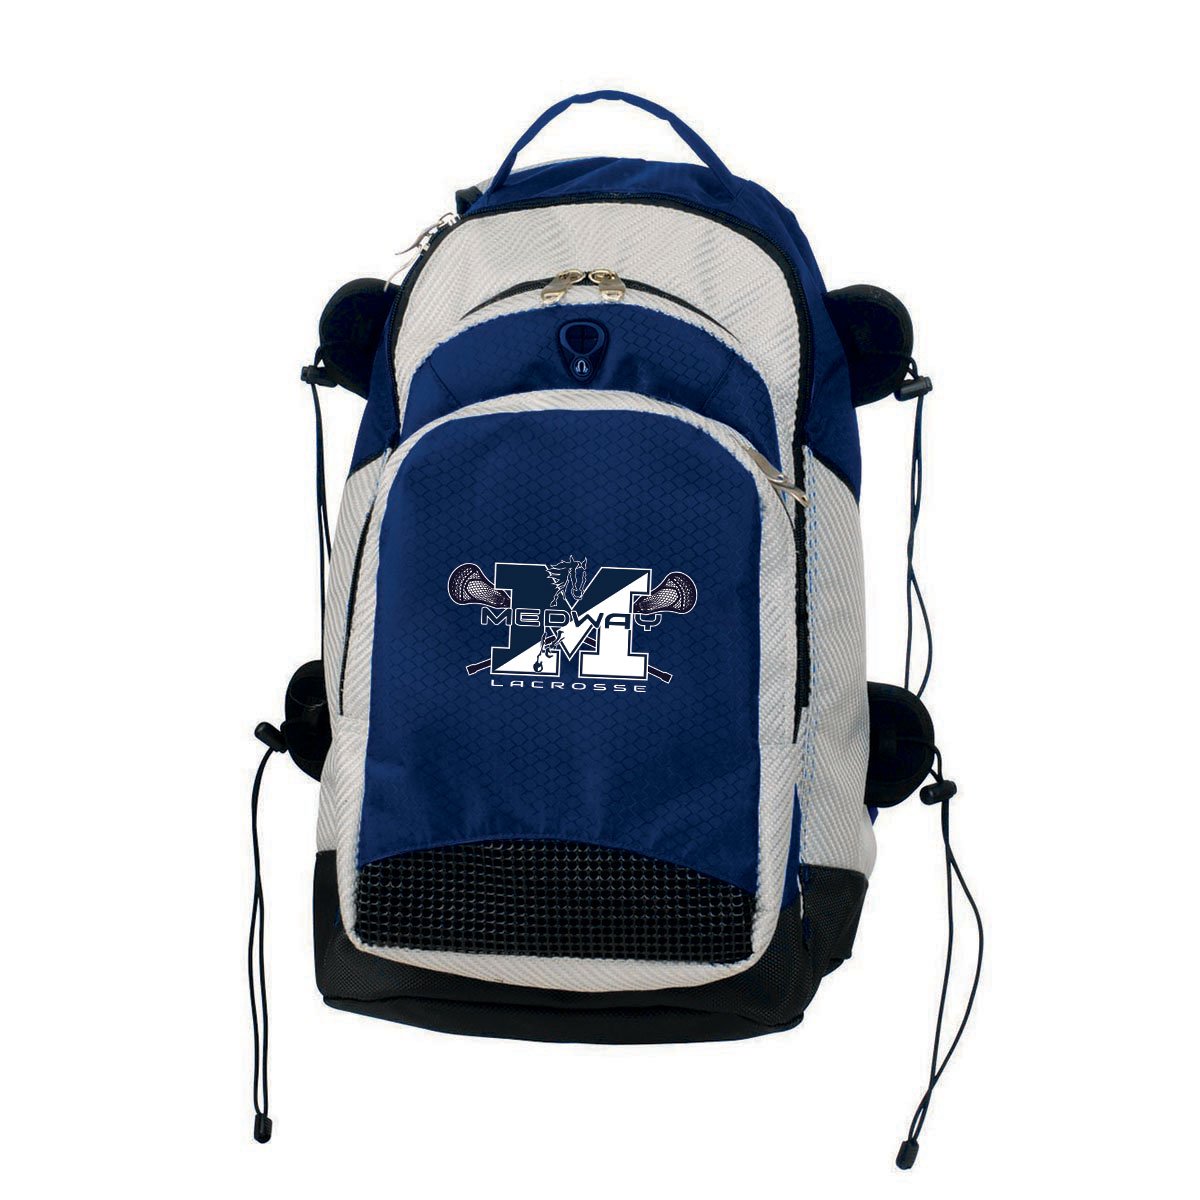 Medway Youth Lacrosse Backpack — Magliaro's Custom Apparel, Inc